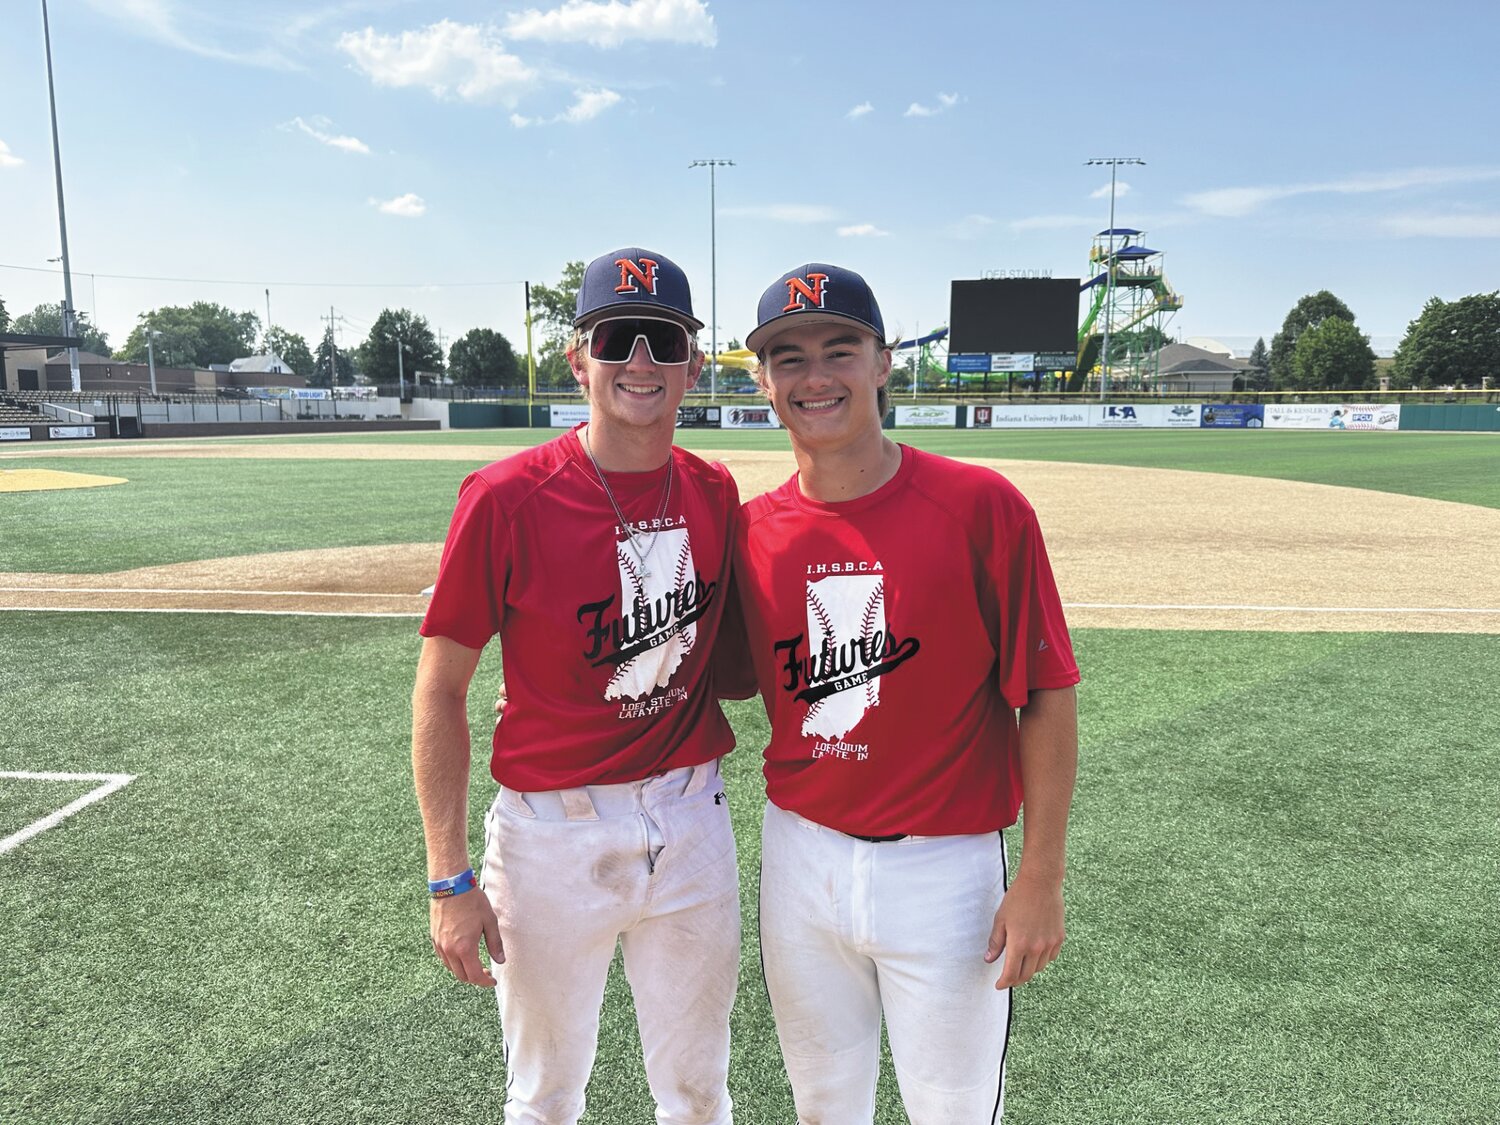 The Charger duo of junior Jarrod Kirsch and Sophomore Cade Cole shared the field Wednesday as they were both selected to participate in the Indiana High School Baseball Coaches Associaton’s Futures Game which showcased the top sophomores and juniors in the state.